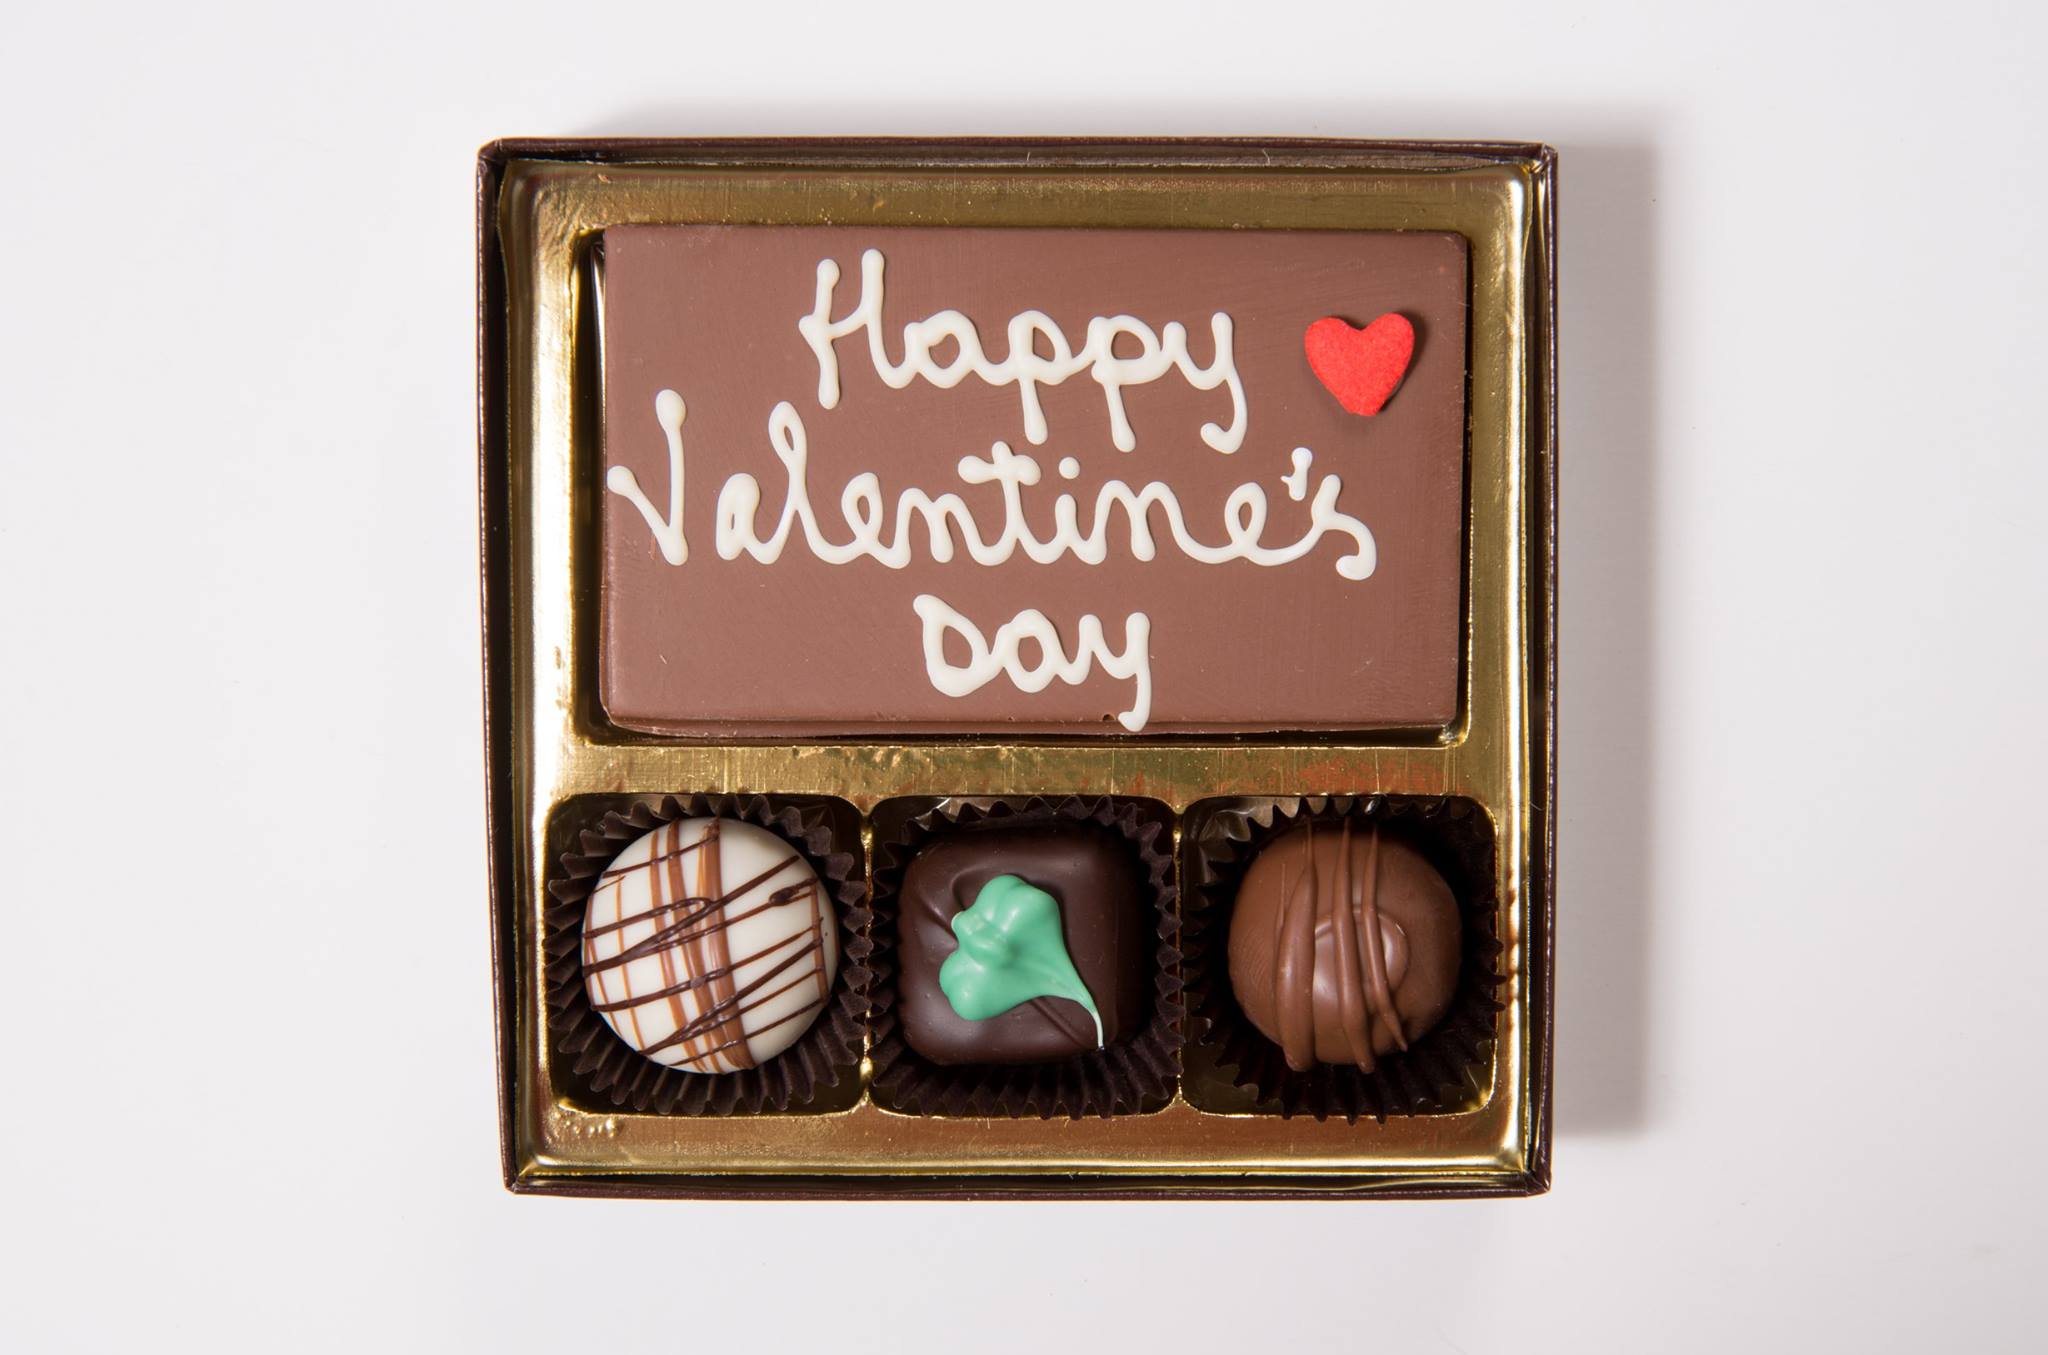 Perfect gifts for your loved ones on Chocolate day